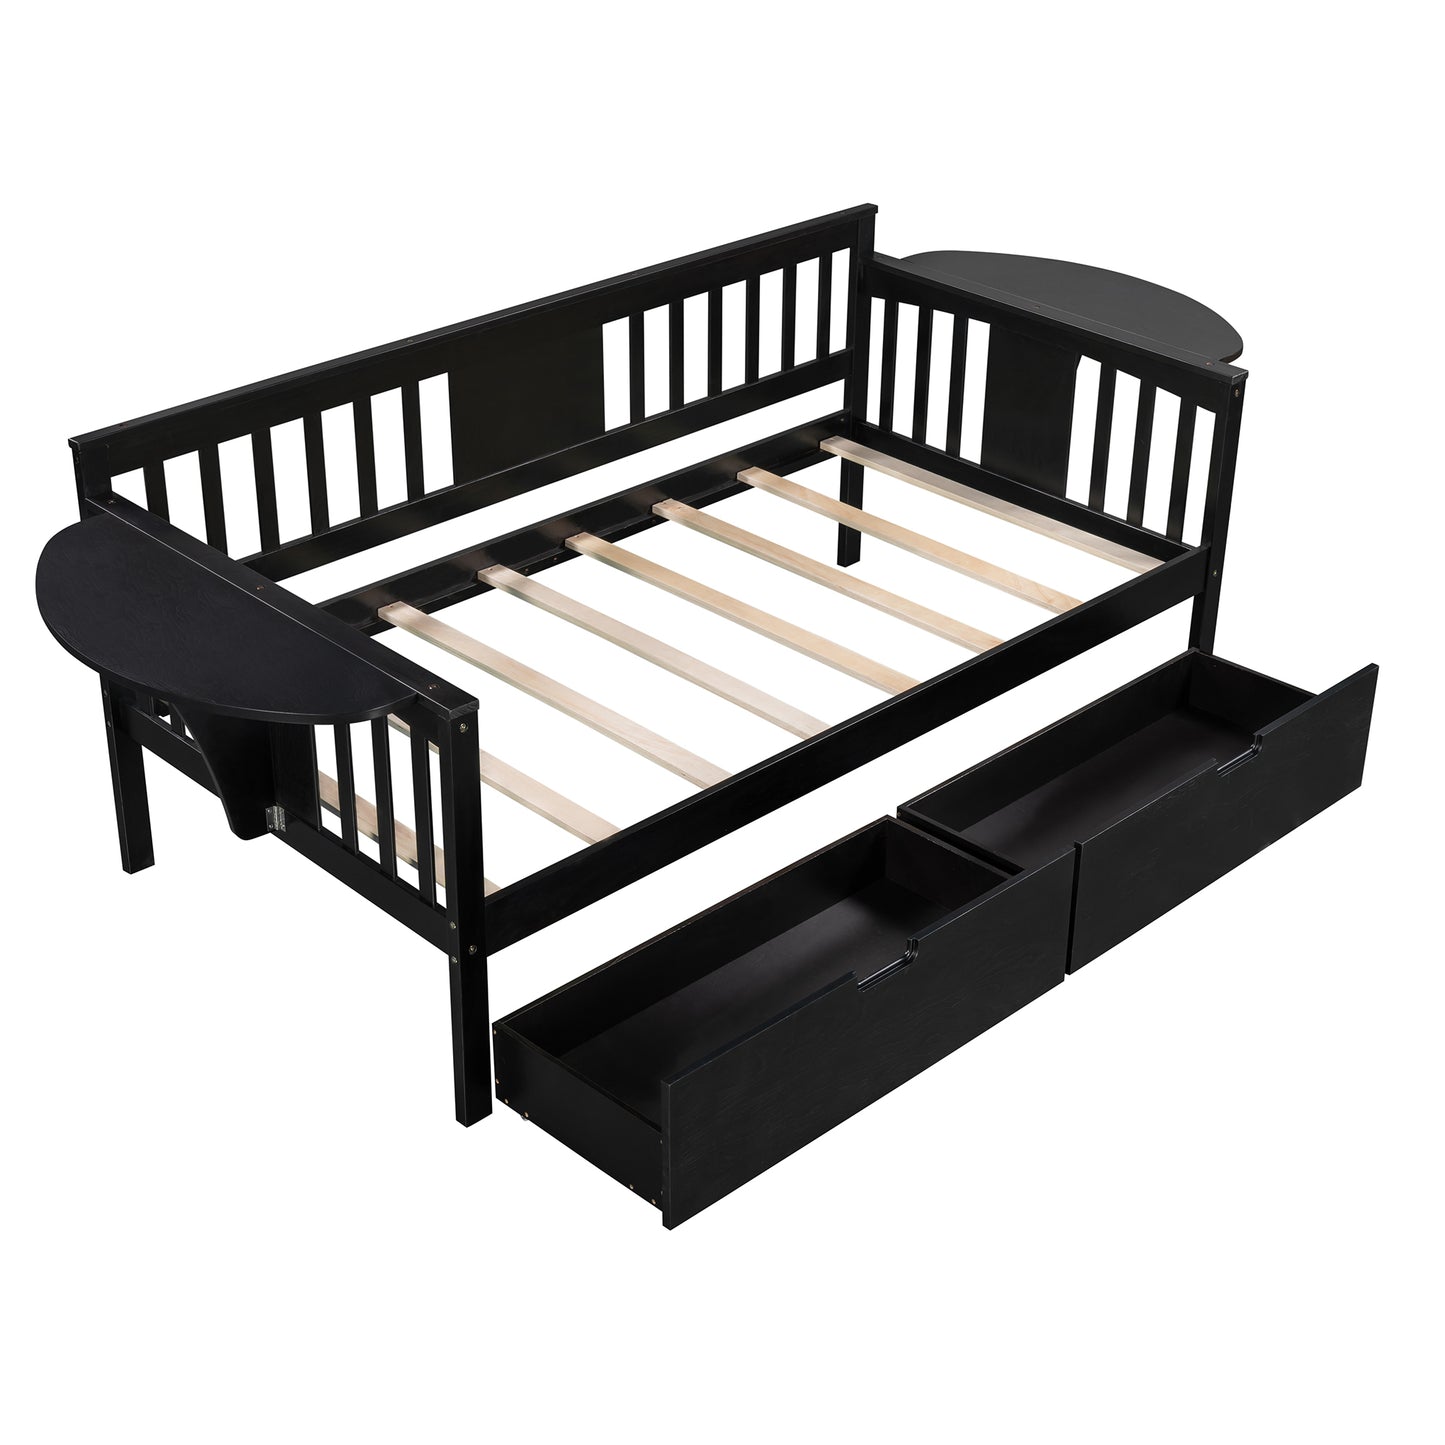 Twin size Daybed with Two Drawers, Wood Slat Support, Espresso